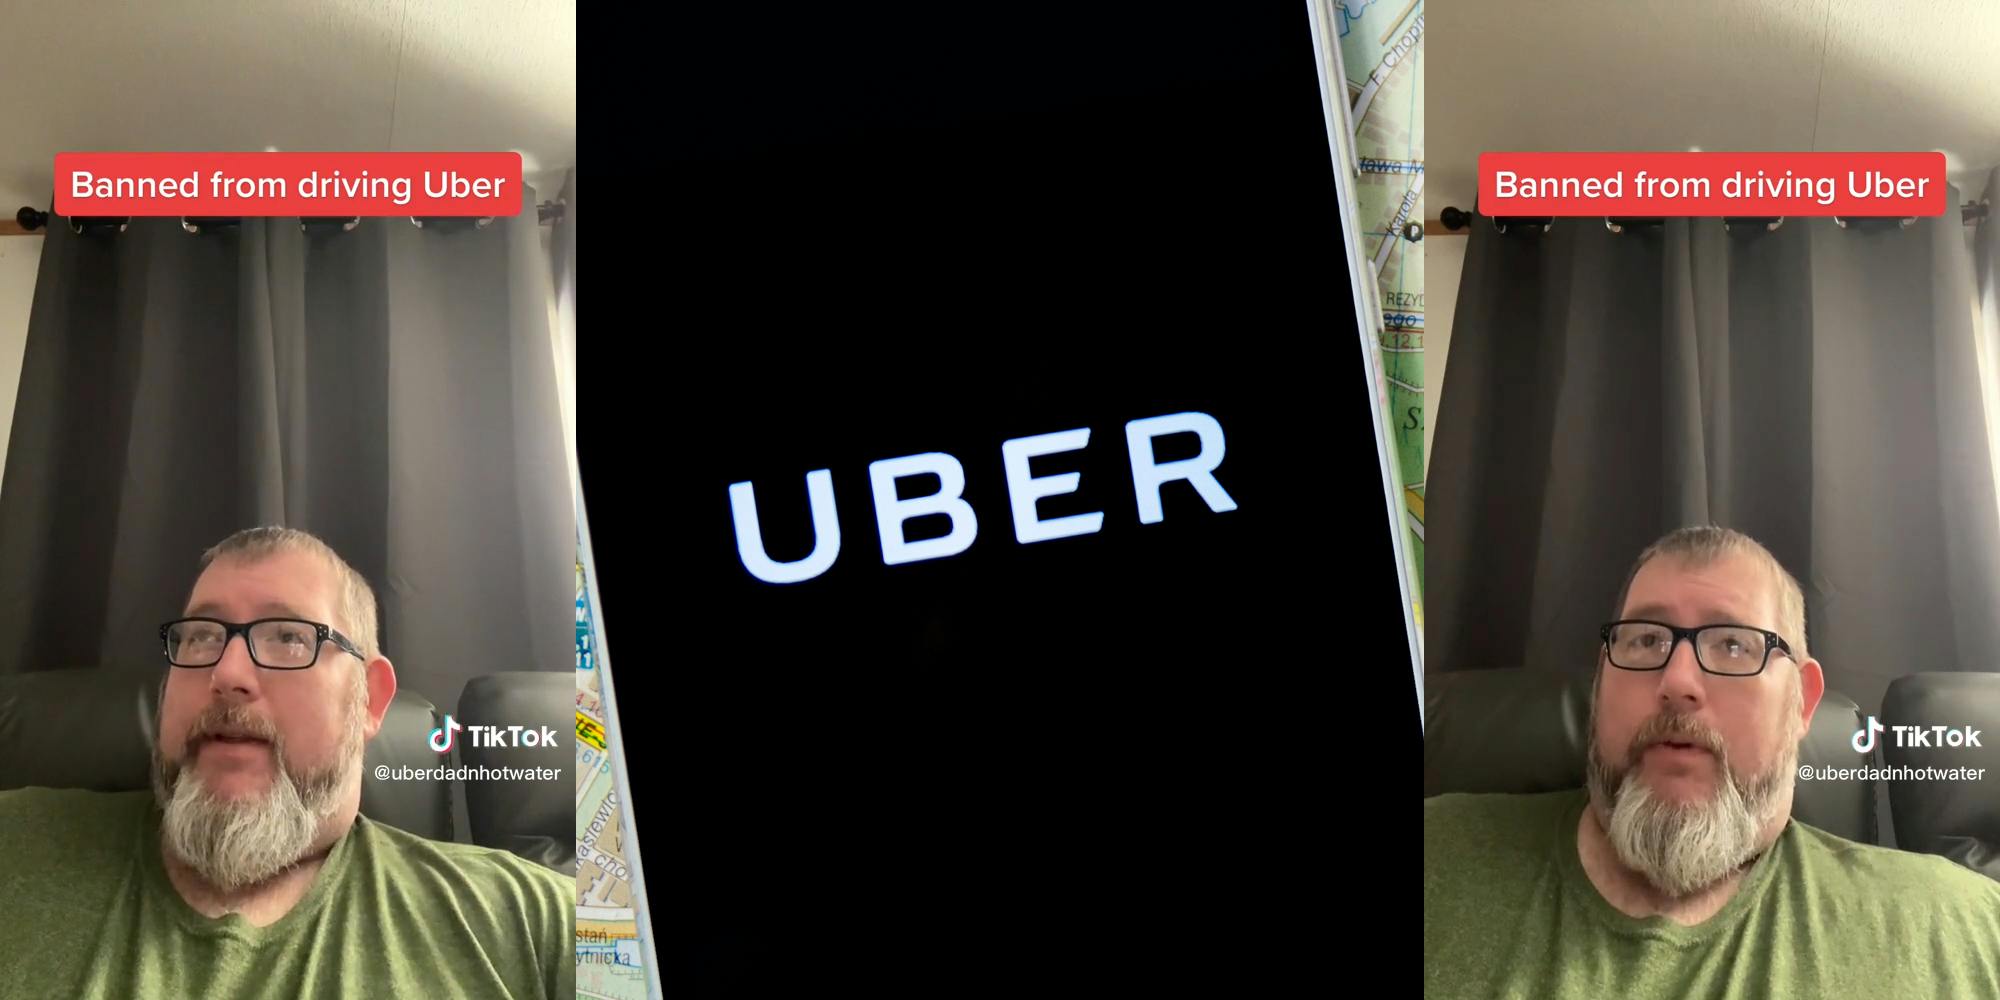 man on couch with caption "banned from driving uber"